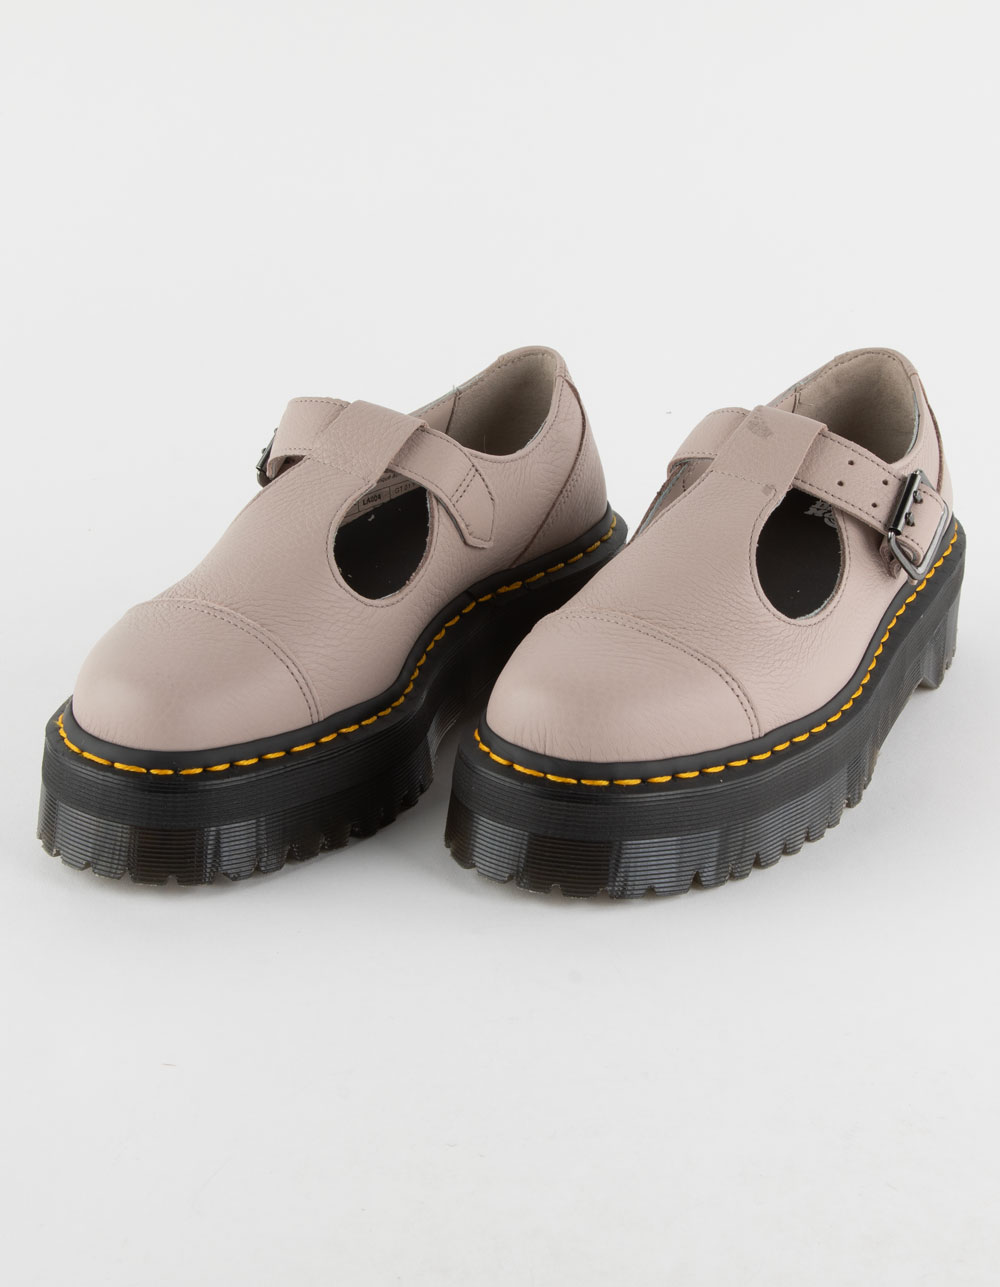 DR. MARTENS Bethan Mary Jane Womens Shoes